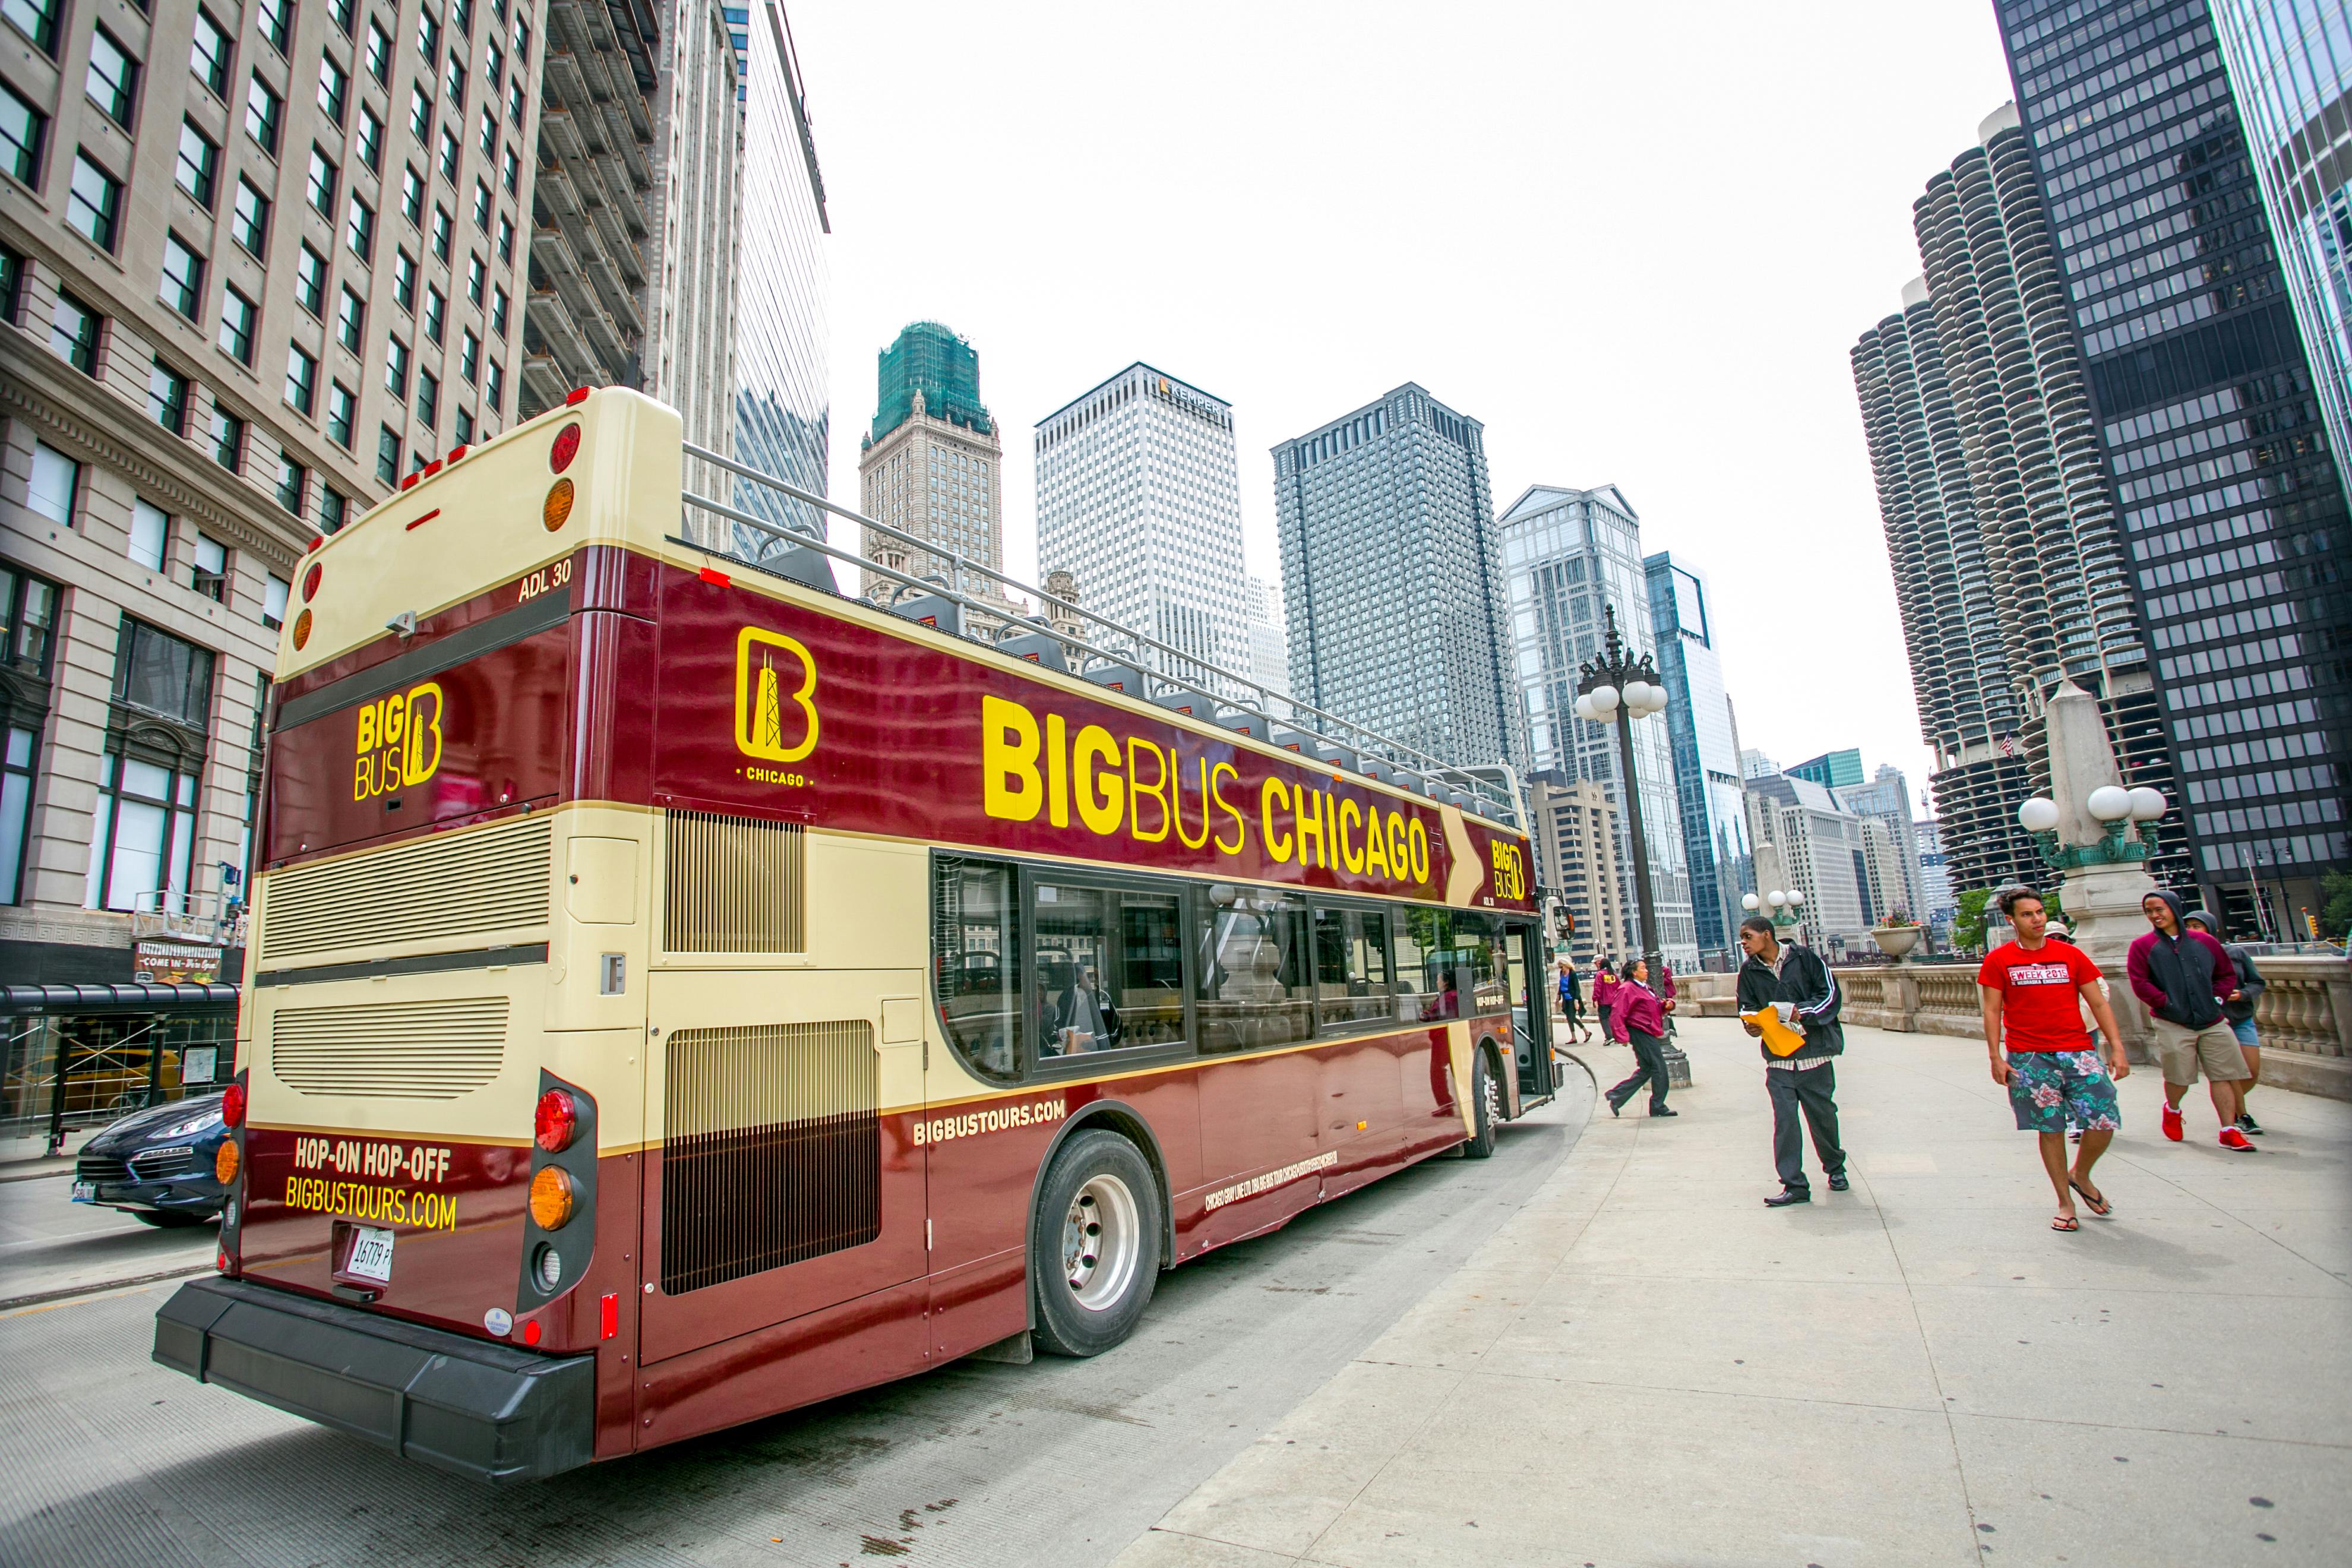 48h Big Bus hop-on hop-off tour of Chicago with Sunset Live Musement